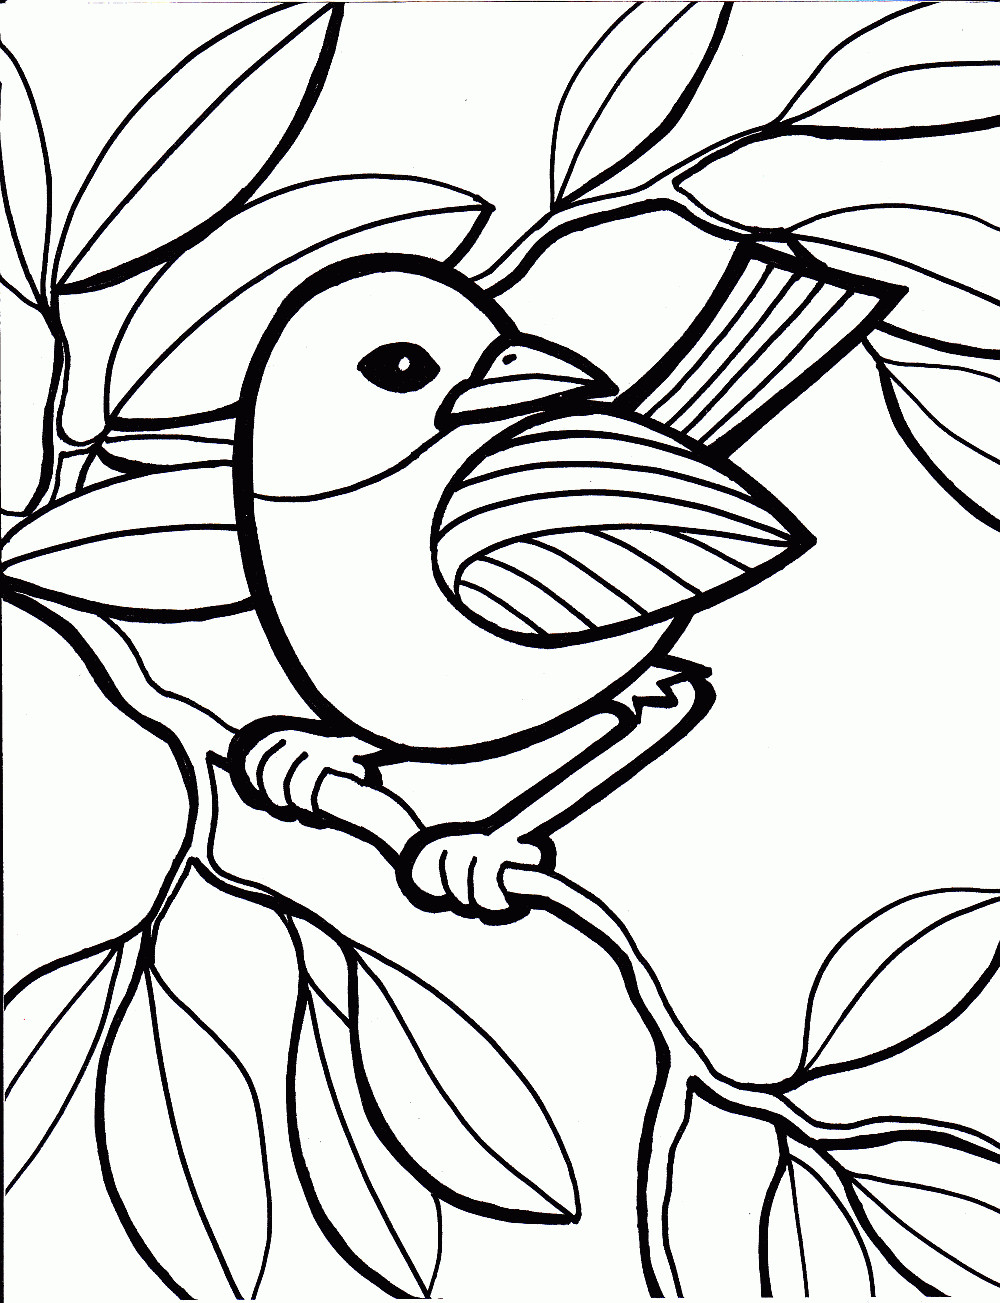 Awesome Coloring Pages For Boys
 Free Coloring Pages For Kids Top Profile